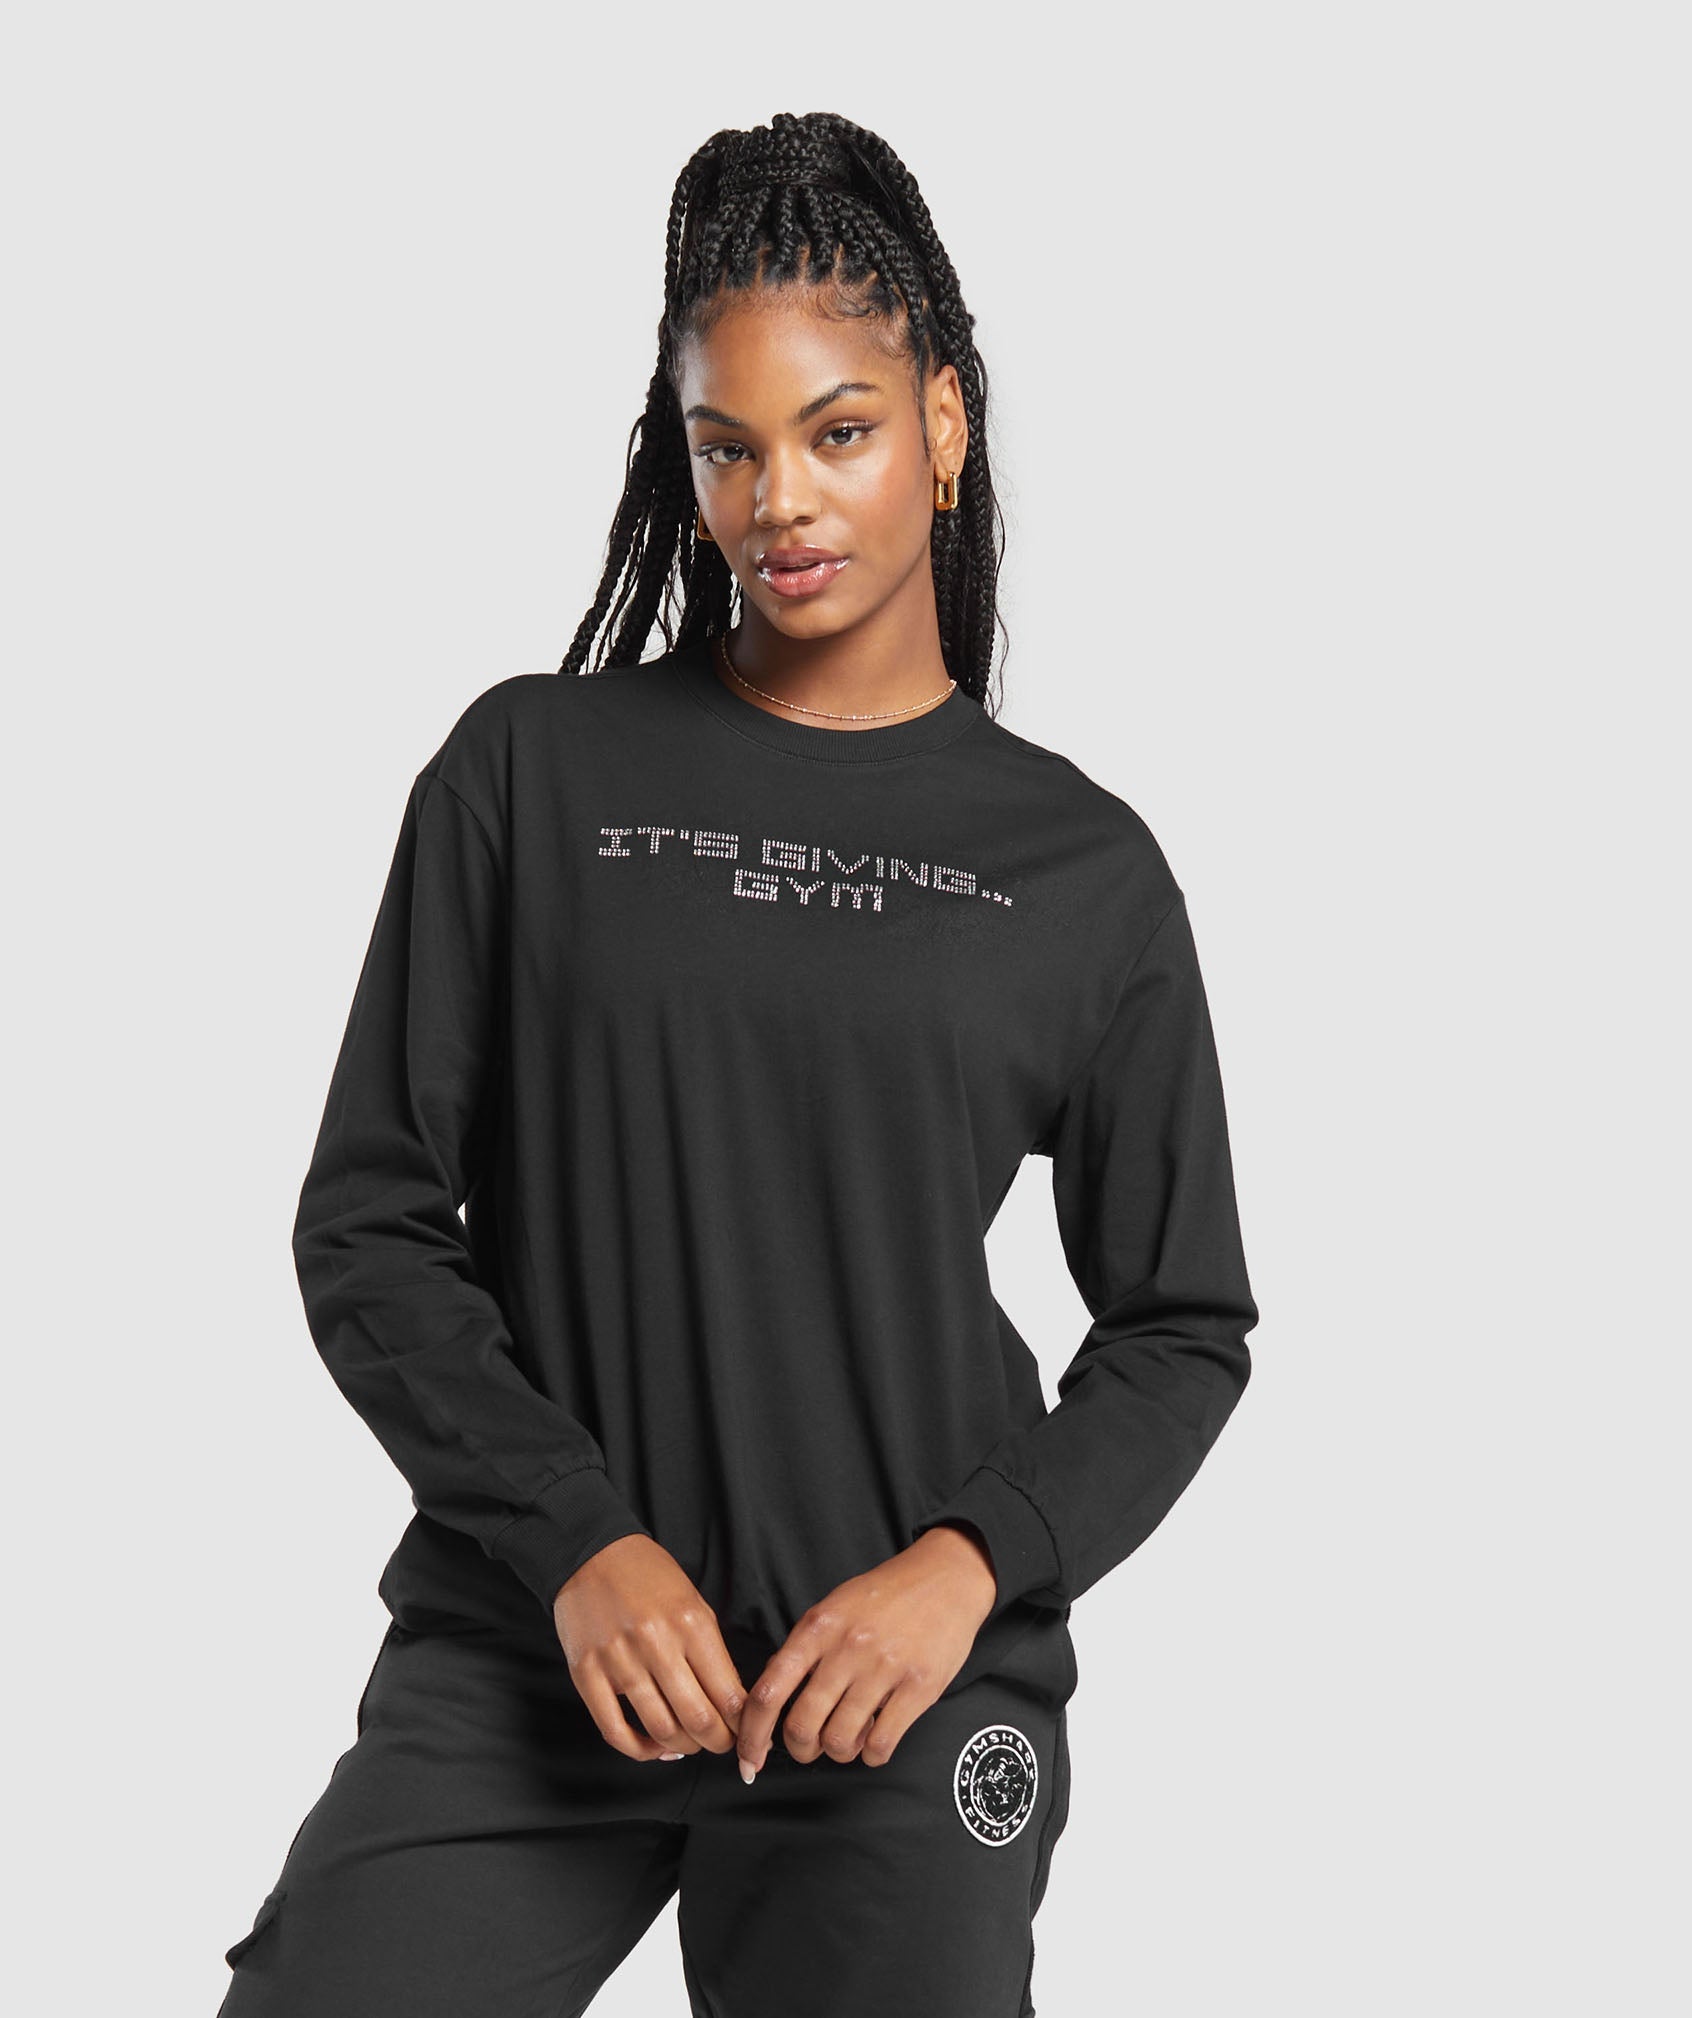 Its Giving Gym Long Sleeve Top in Black - view 1